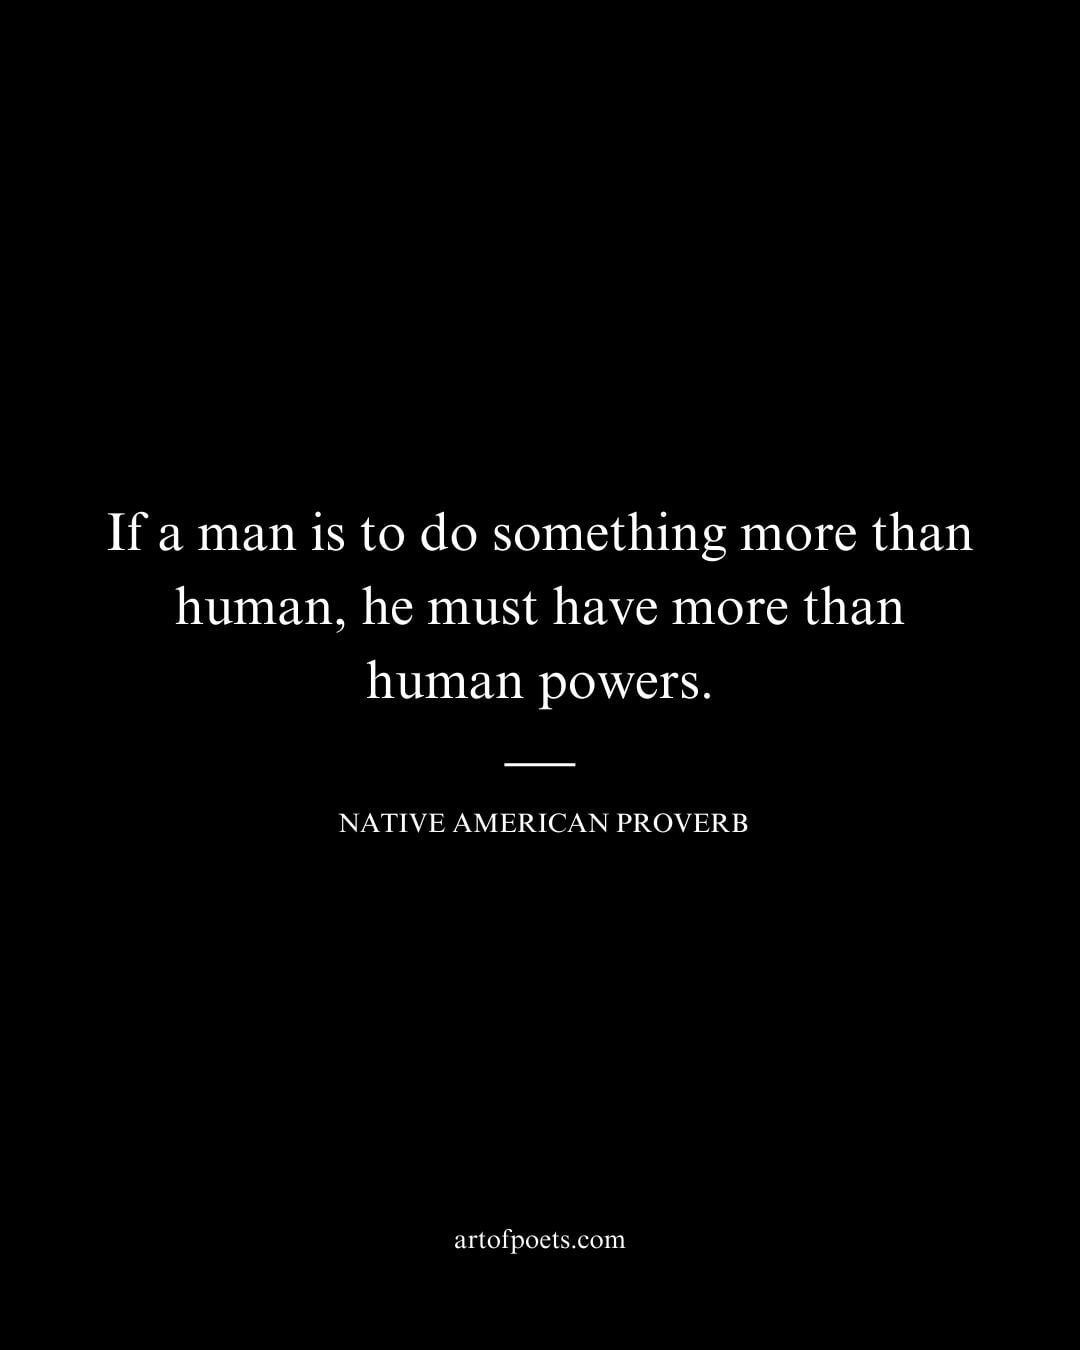 If a man is to do something more than human he must have more than human powers